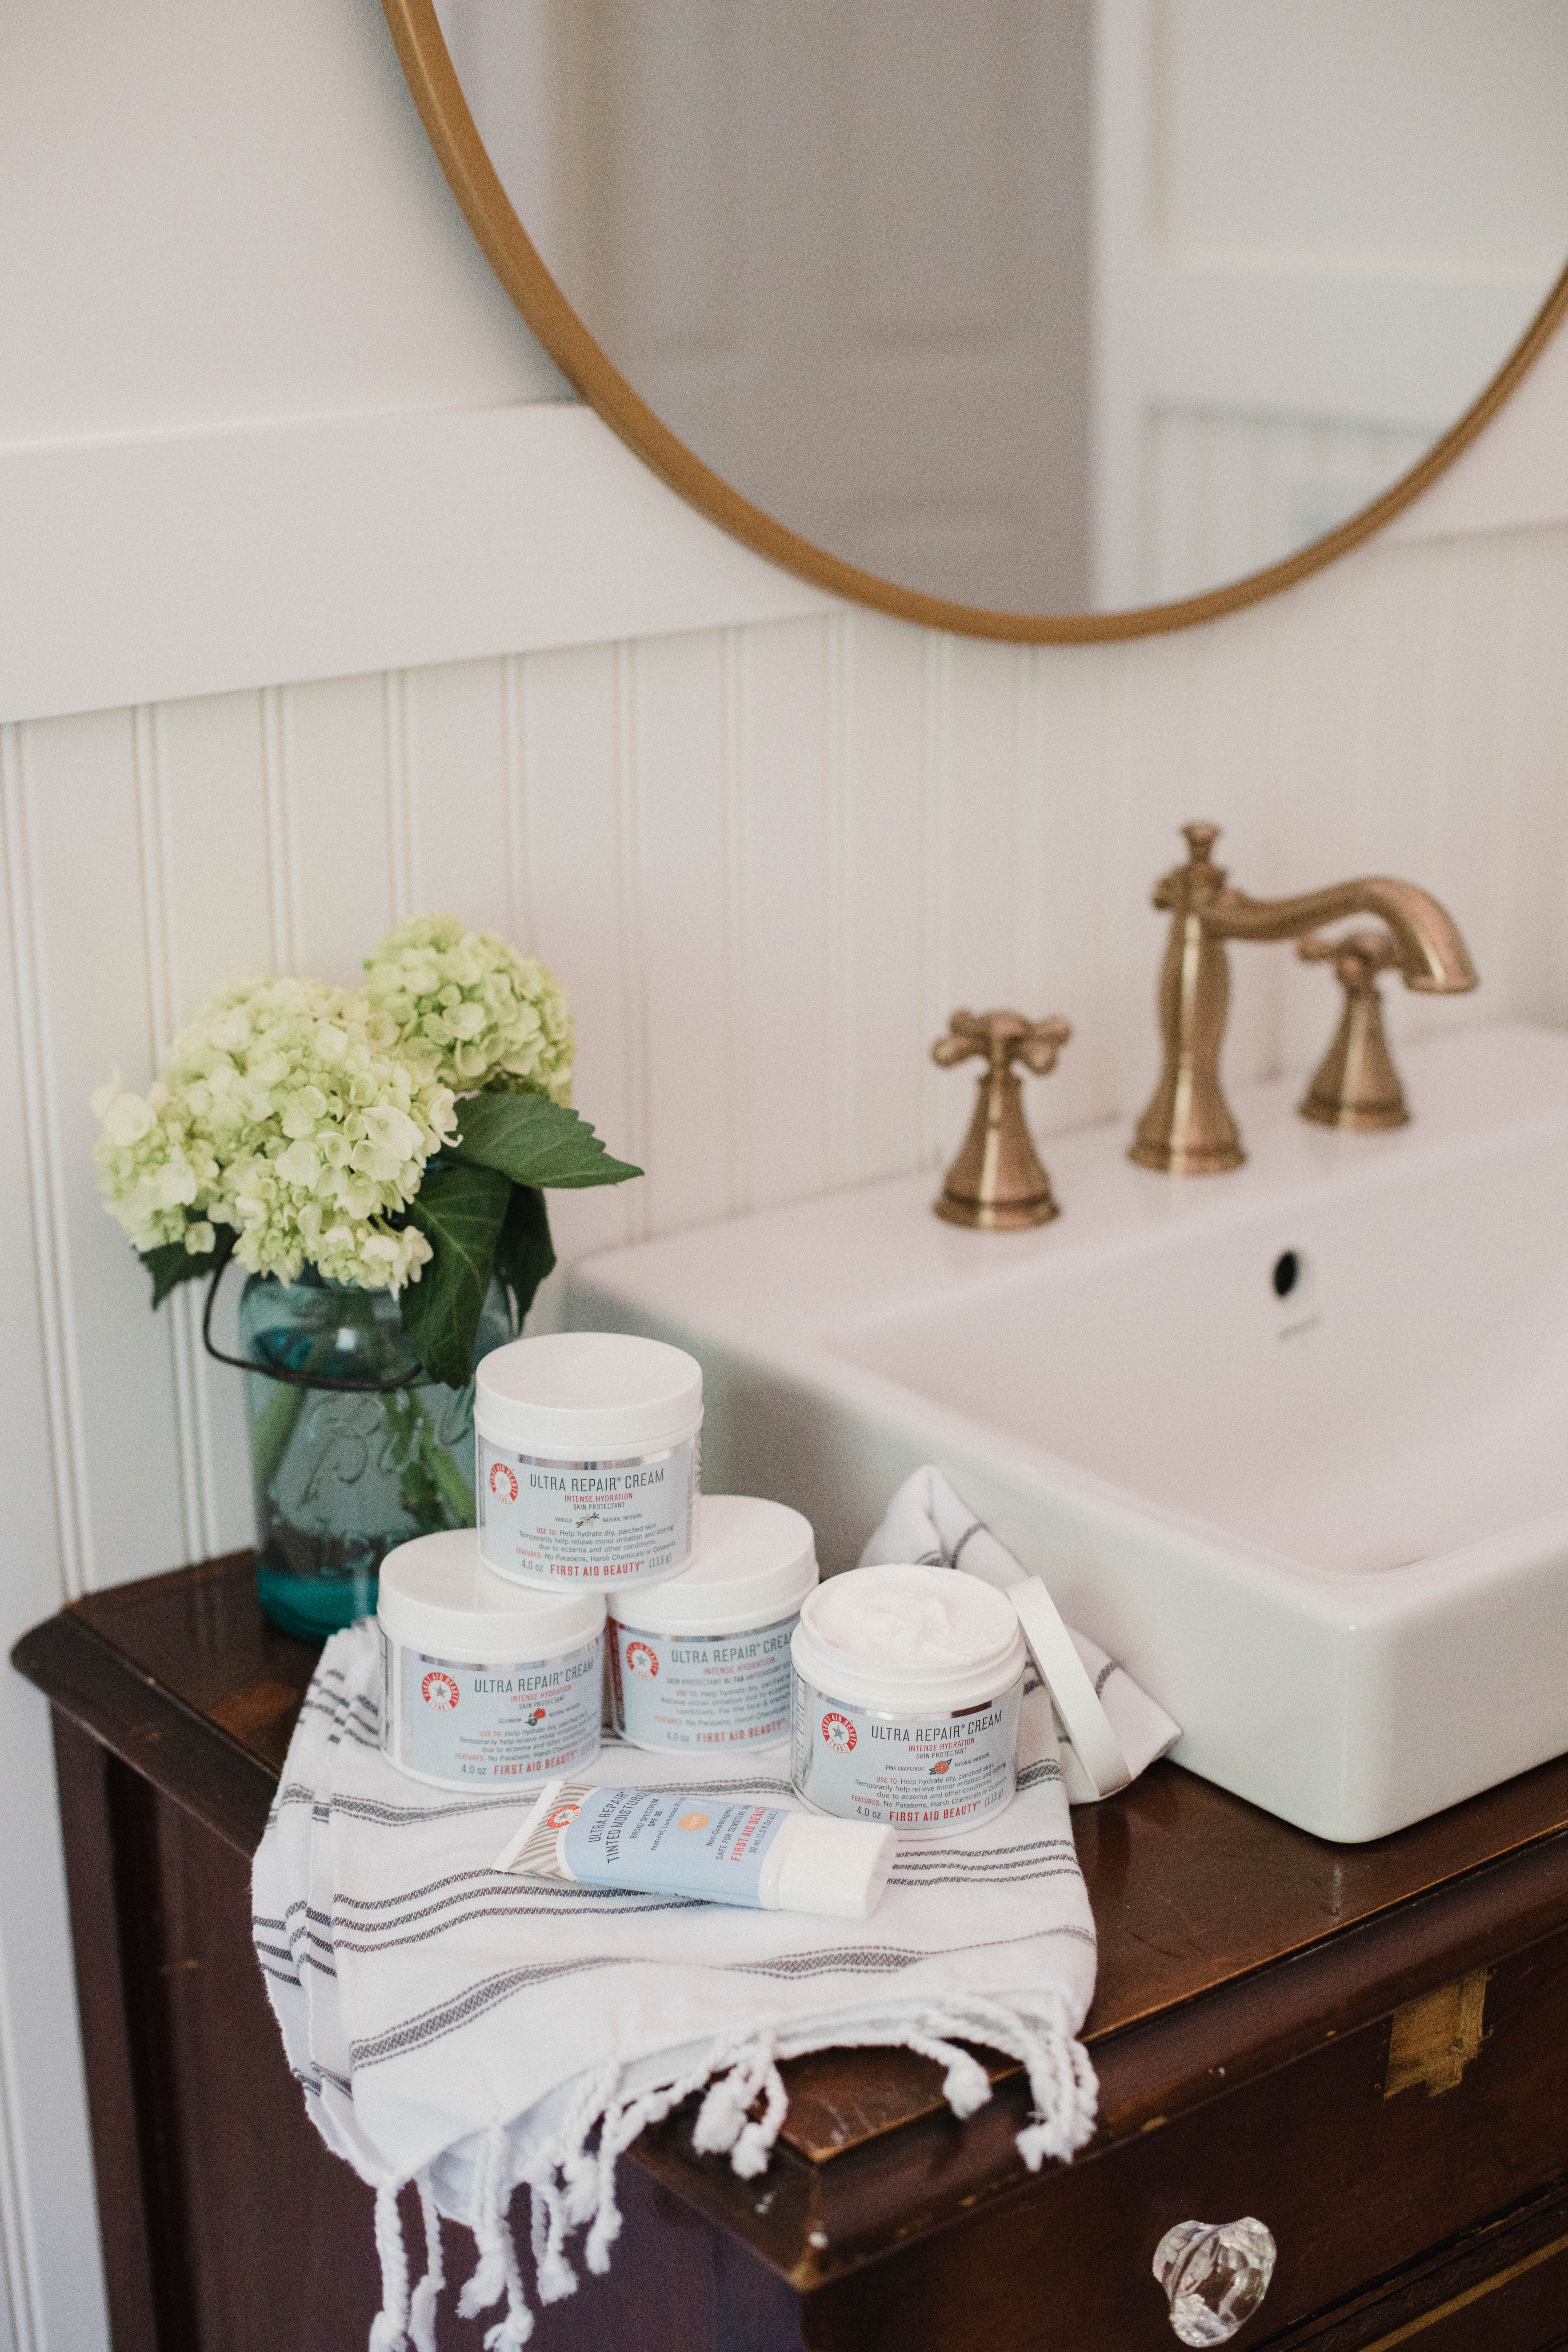 Connecticut life and style blogger Lauren McBride shares 5 items from QVC that will make you feel nice if you're in need of some pampering.